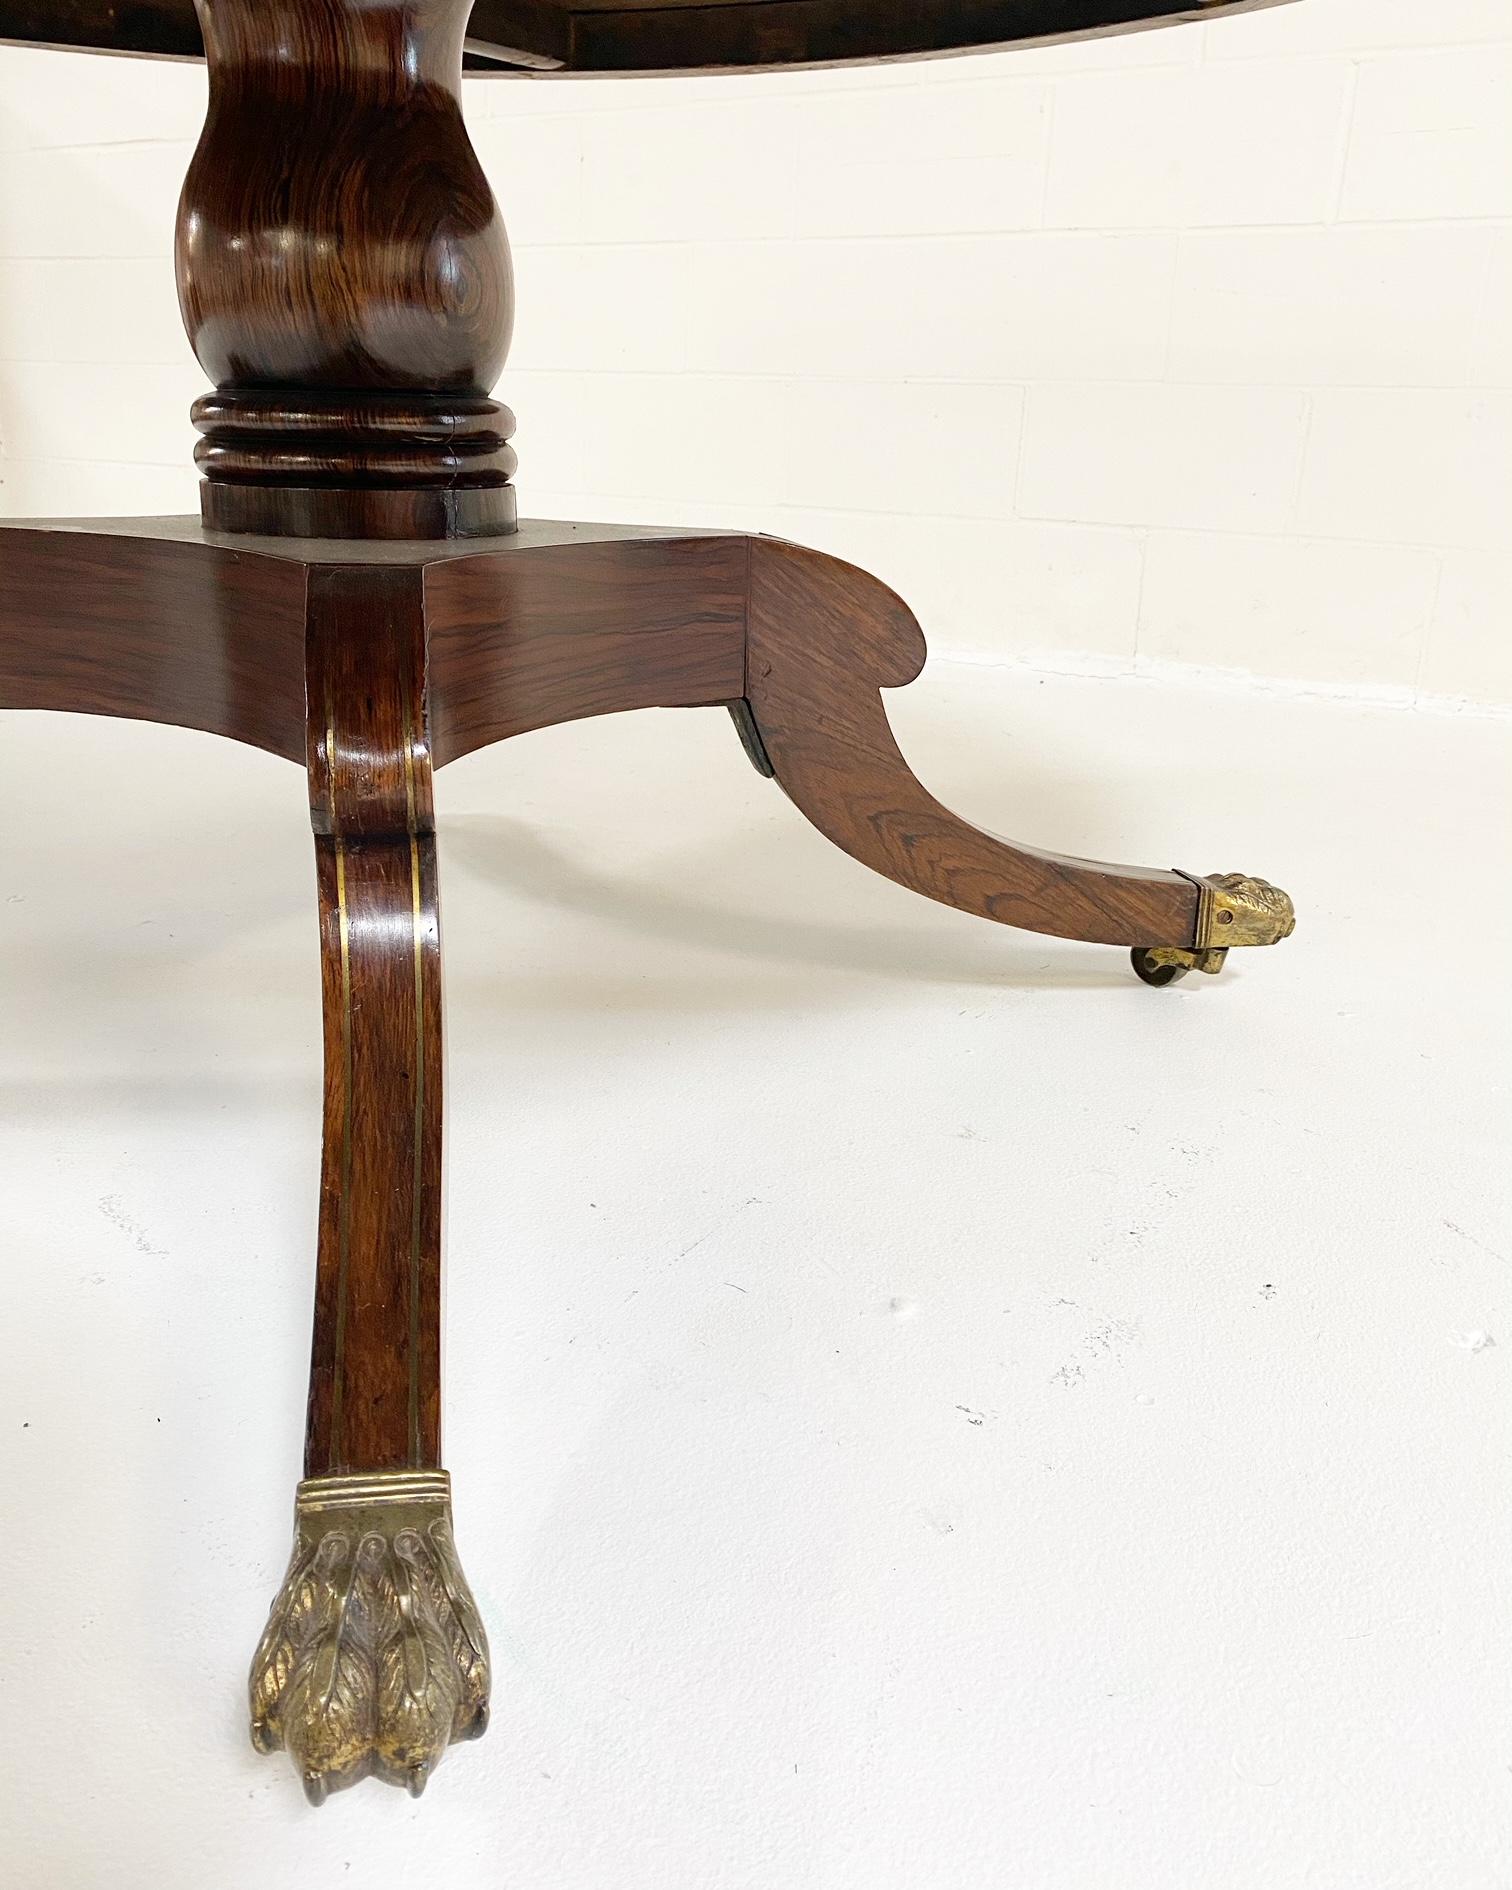 Made in England in 1810, this stunning rosewood George III dining table is such a great size. More of an oval shape than perfectly round, it comfortably fits 6 chairs but can certainly accommodate 8. The table is elegantly cross-banded with brass